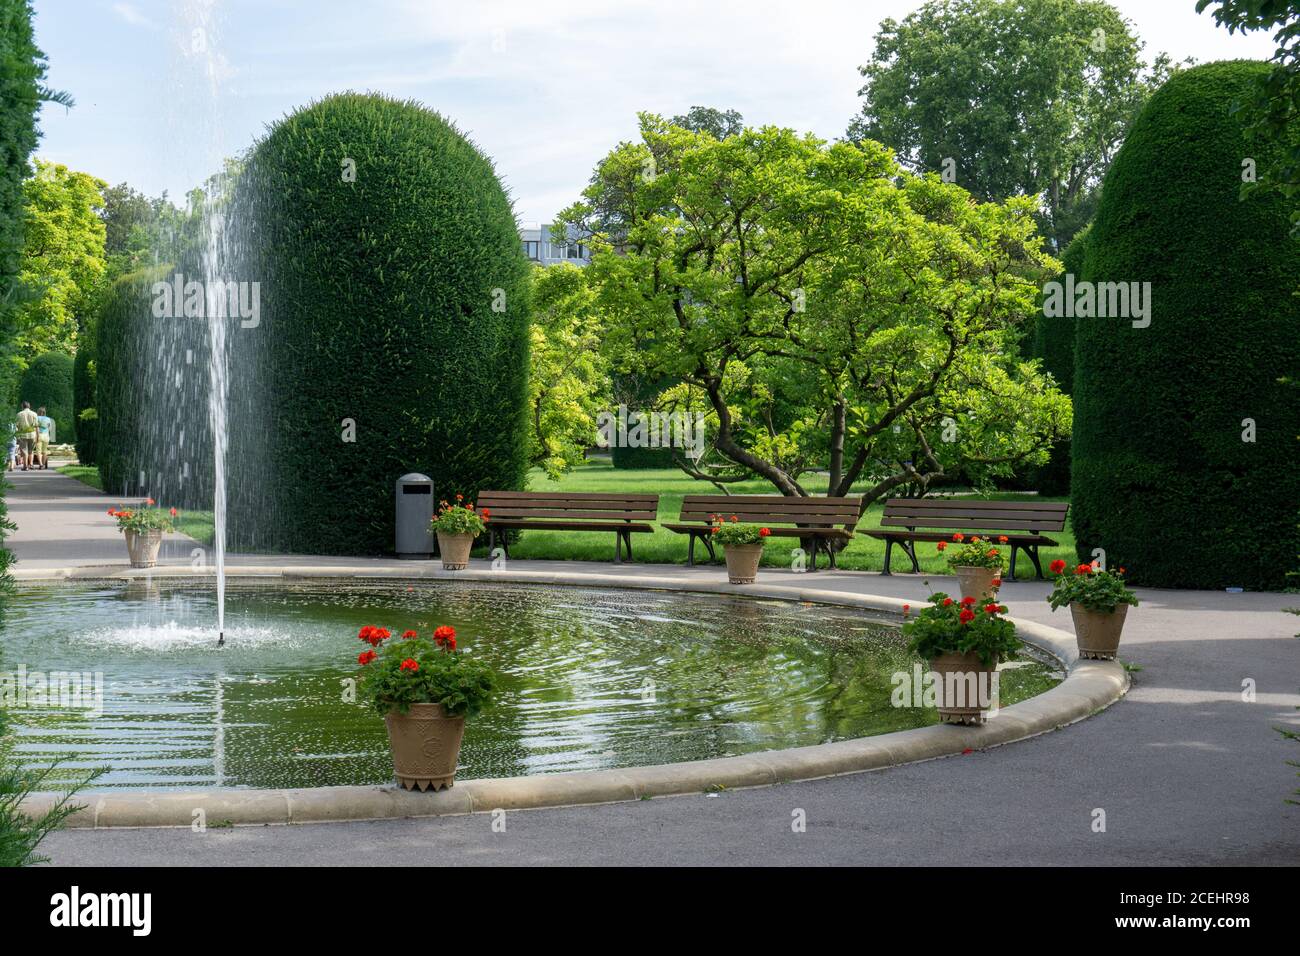 Stuttgart, BW / Germany - 20 July 2020: the beautiful grounds of the Wilhelma zoological and botanical gardens in Stuttgart Stock Photo